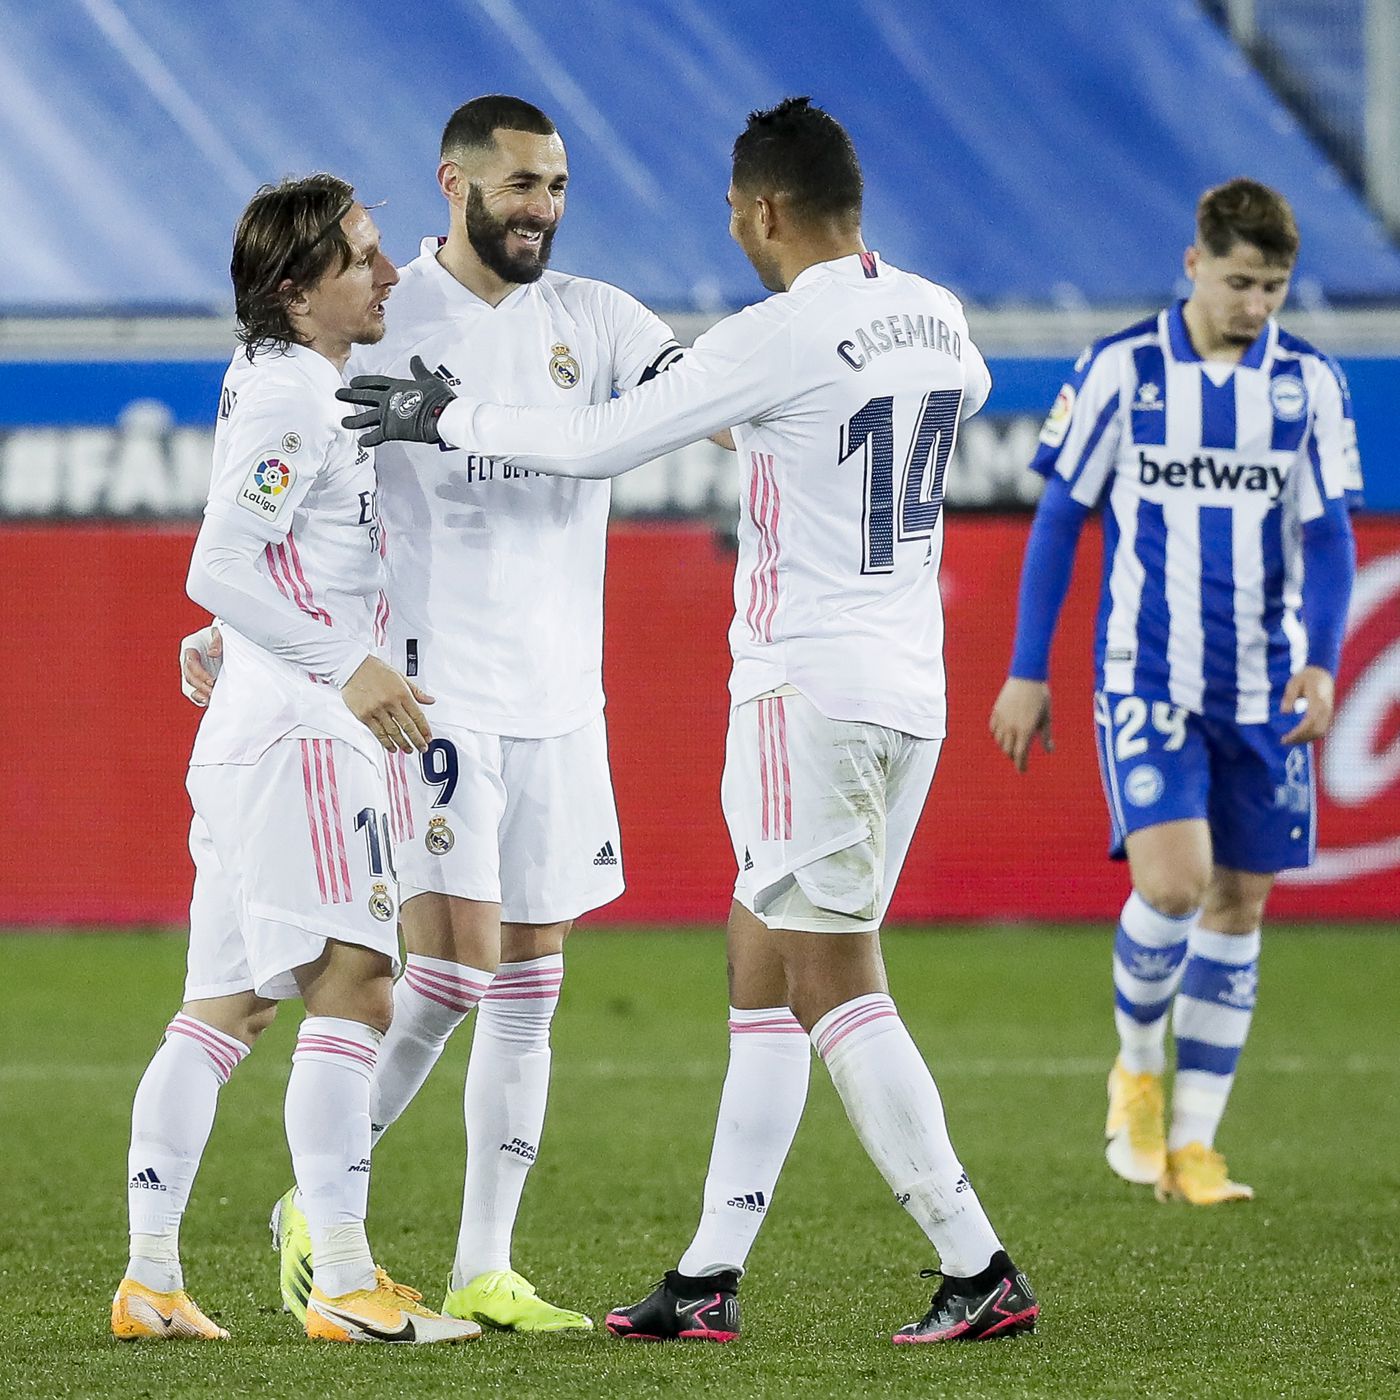 Deportivo Alavés—Real Madrid La Liga 2021-22 Match Preview, Injuries/Suspensions, Potential XIs, Prediction - Managing Madrid